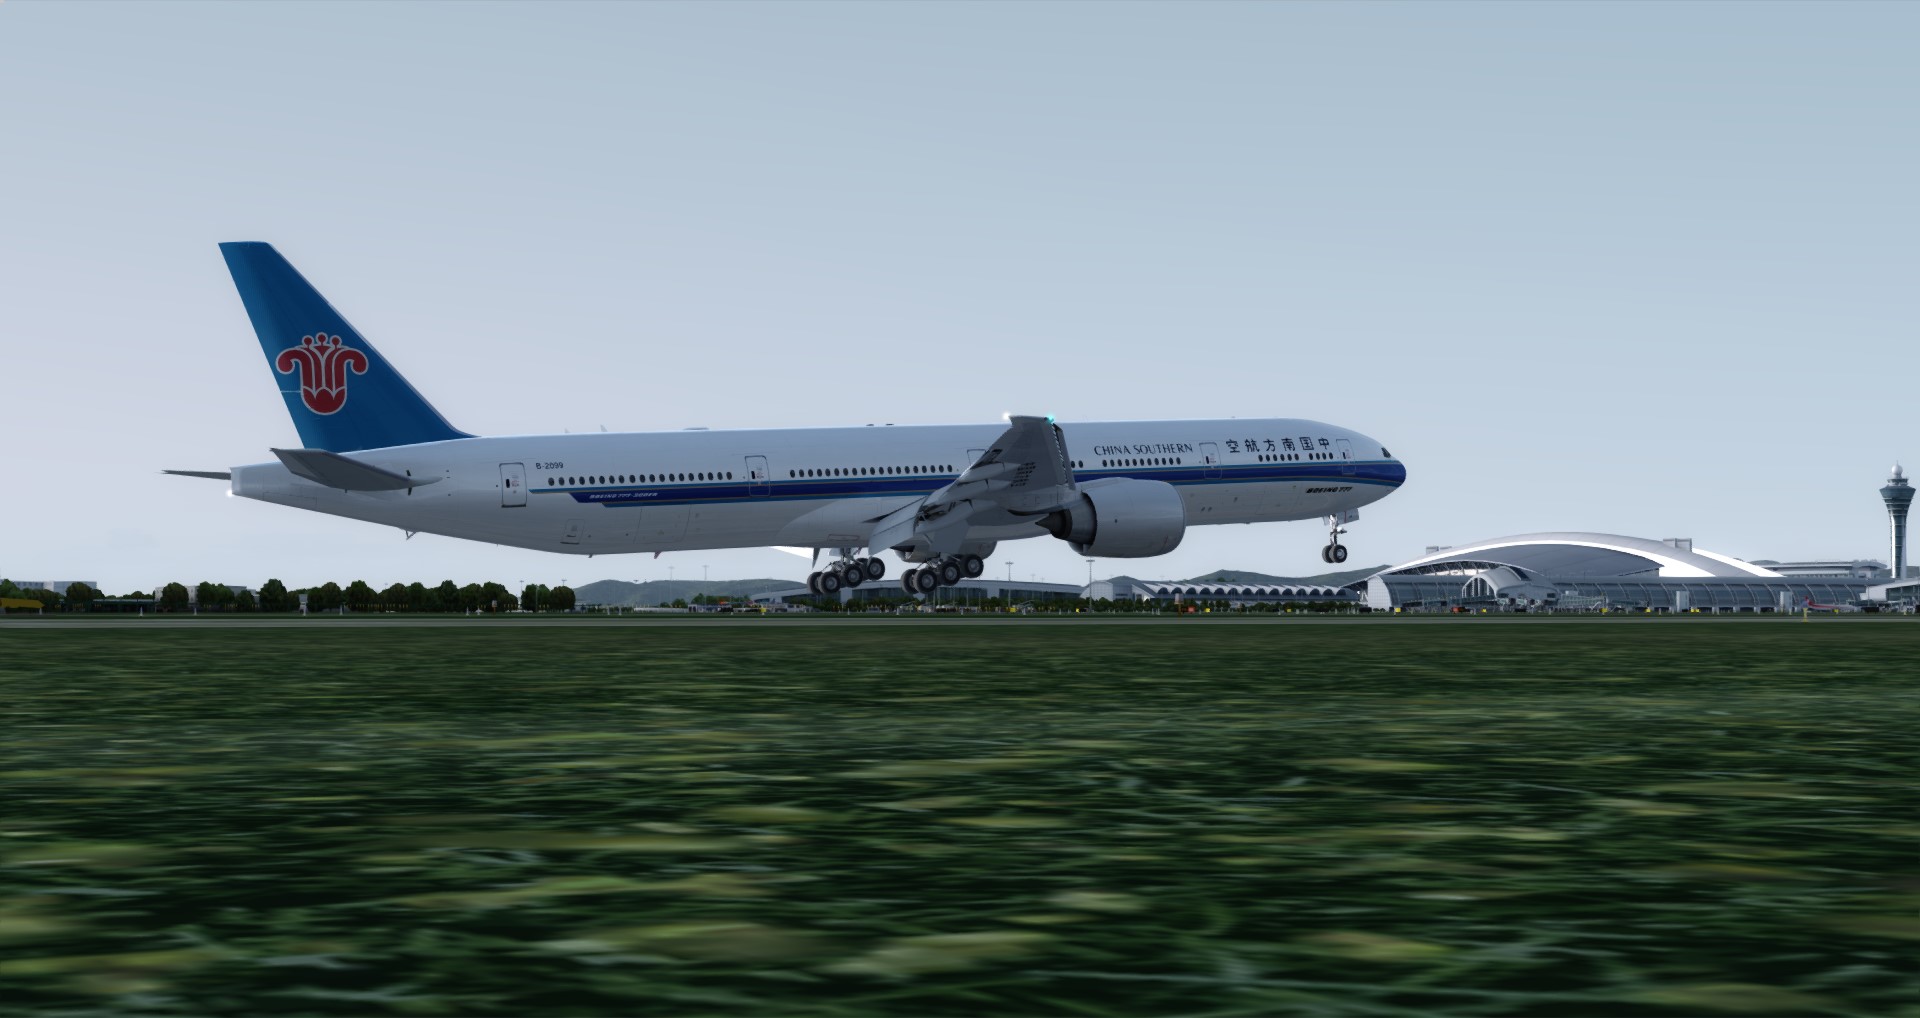 P3D V4 77W China Southern Airlines WADD-ZGGG 营救同胞-2735 